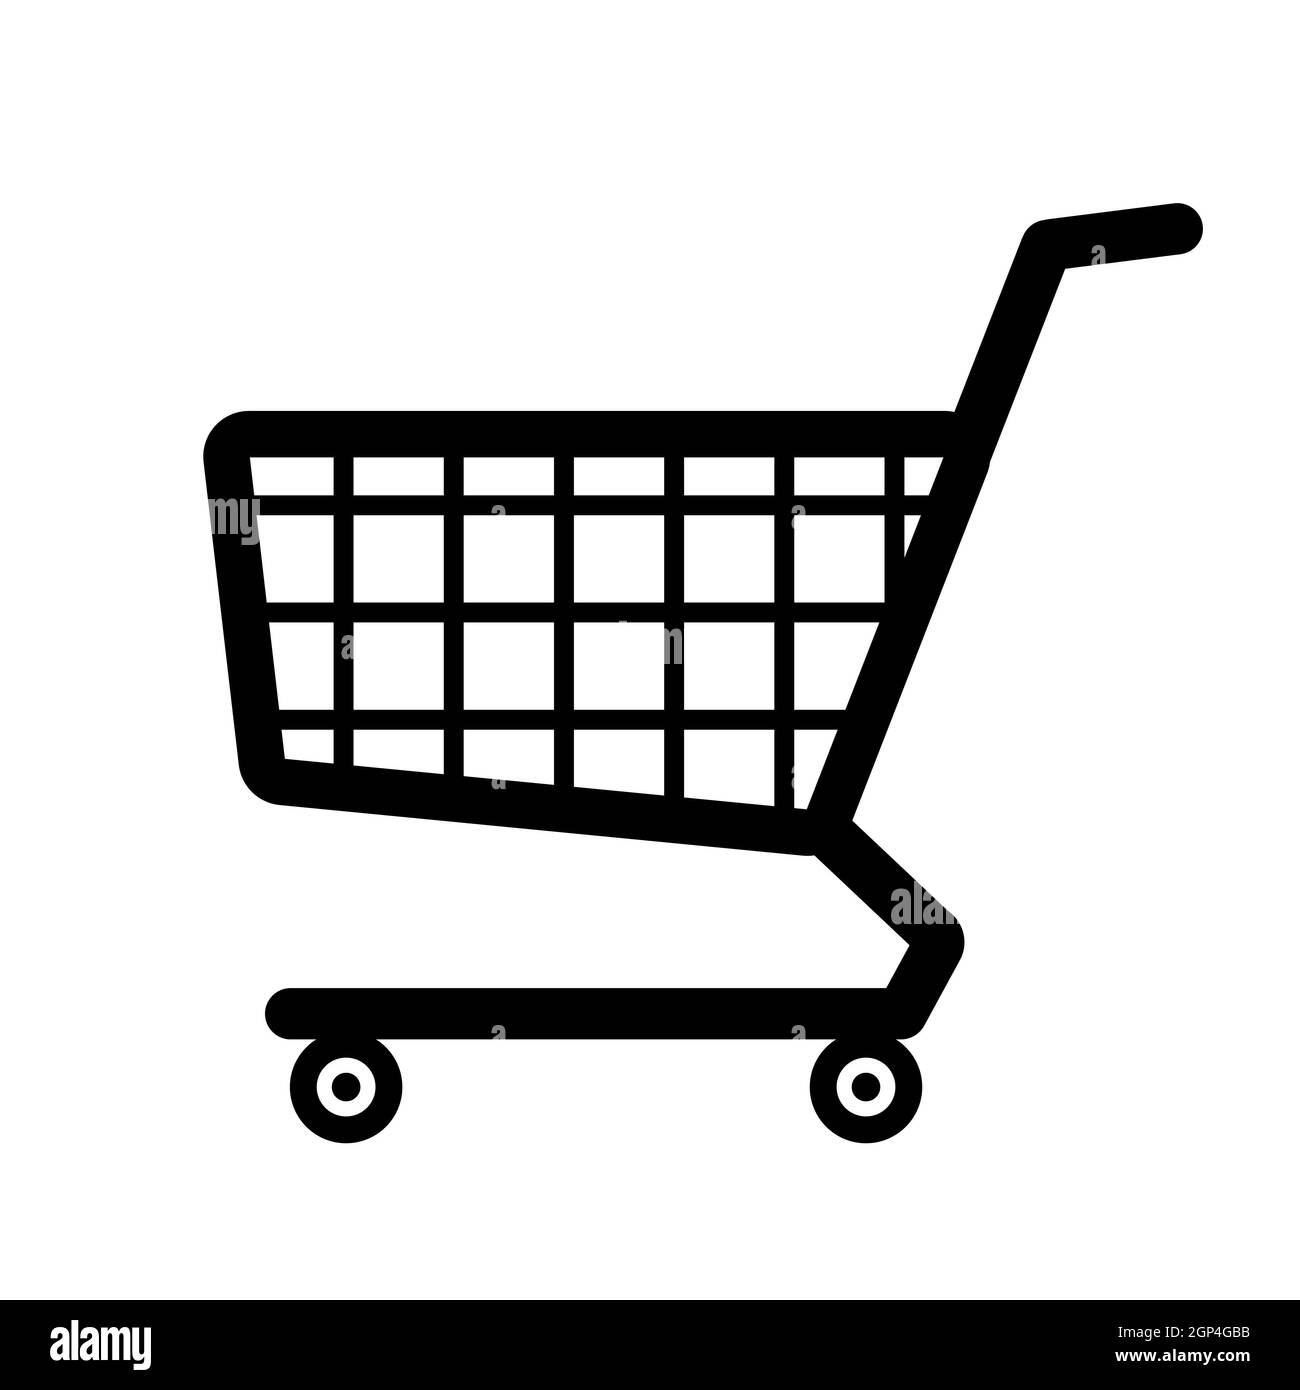 Abstract grocery cart on wheels from supermarket - Vector illustration Stock Photo